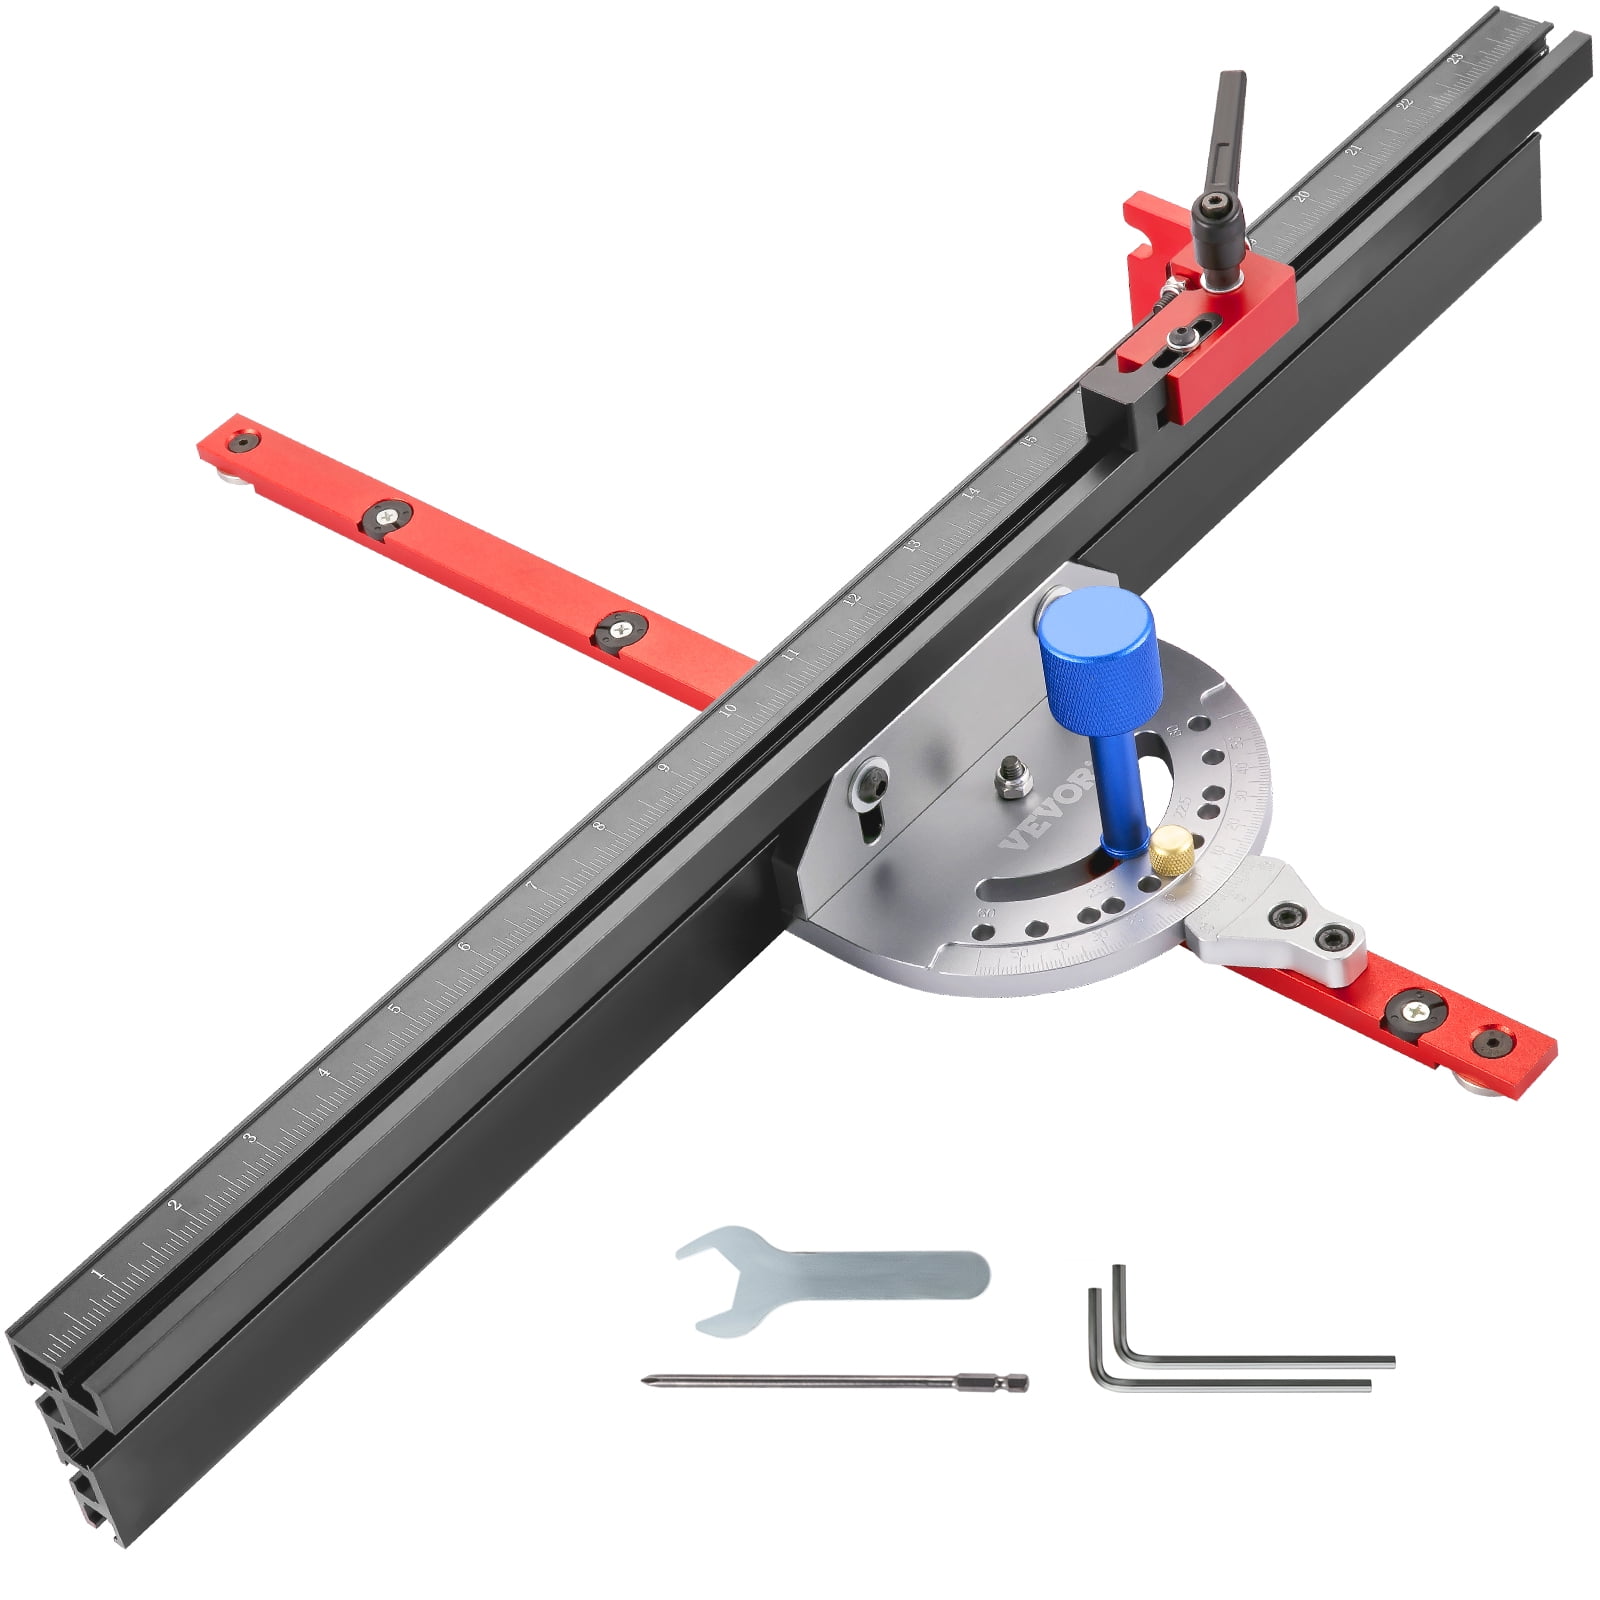 ROUTER TABLE ANGLE MITRE GUIDE GAUGE FENCE TABLE SAW BANDSAW 